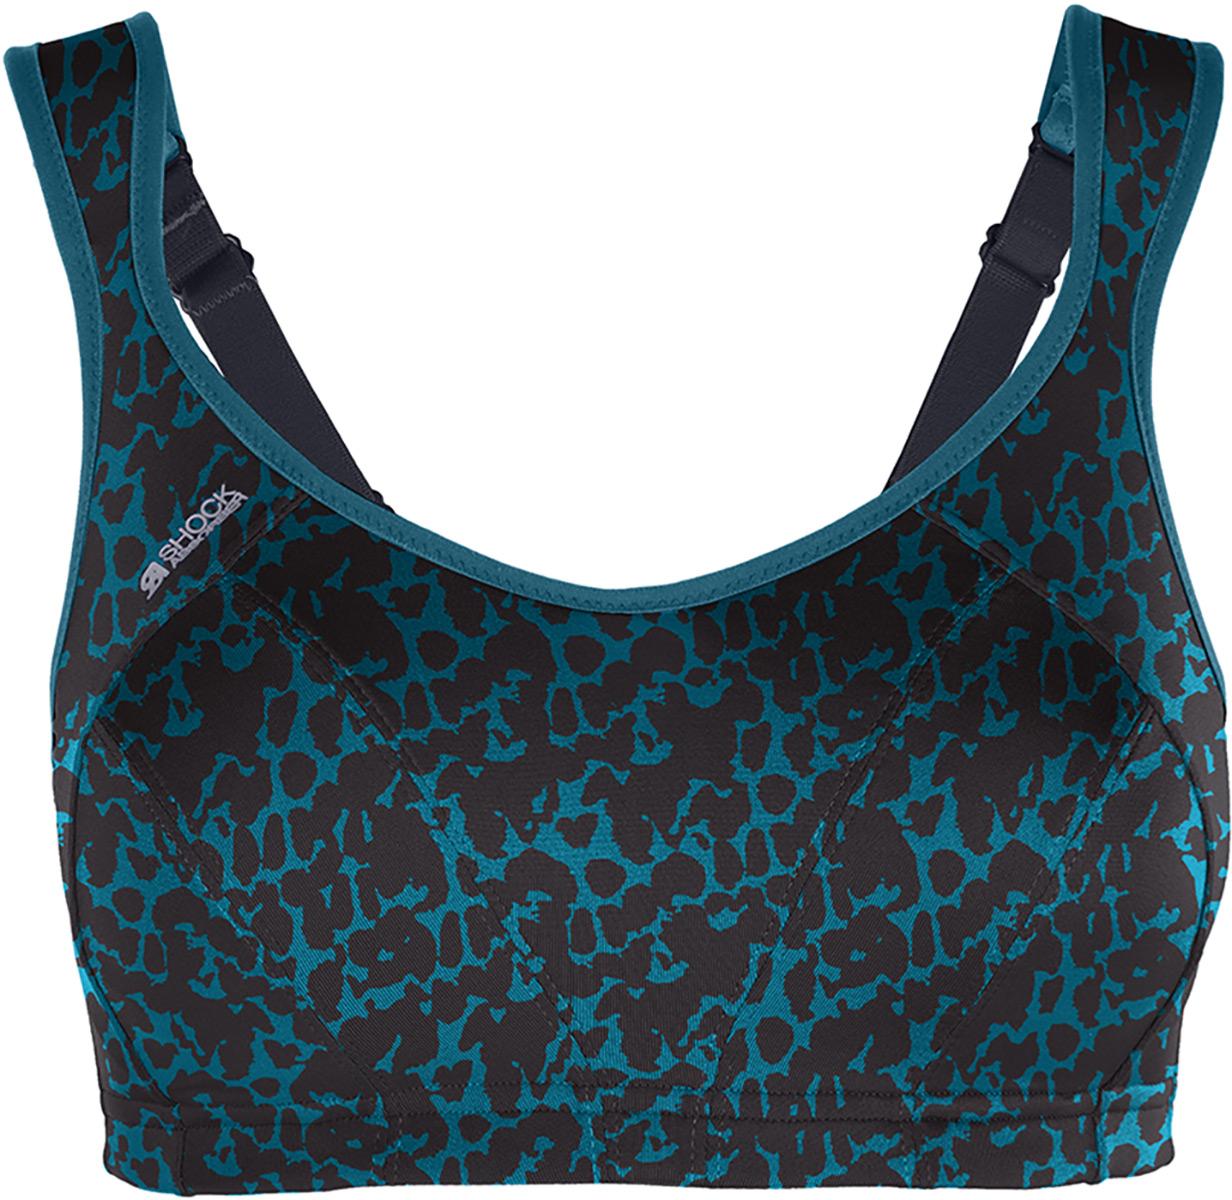 Shock Absorber Active Multi Sports Support Sports Bra - Leopard Print